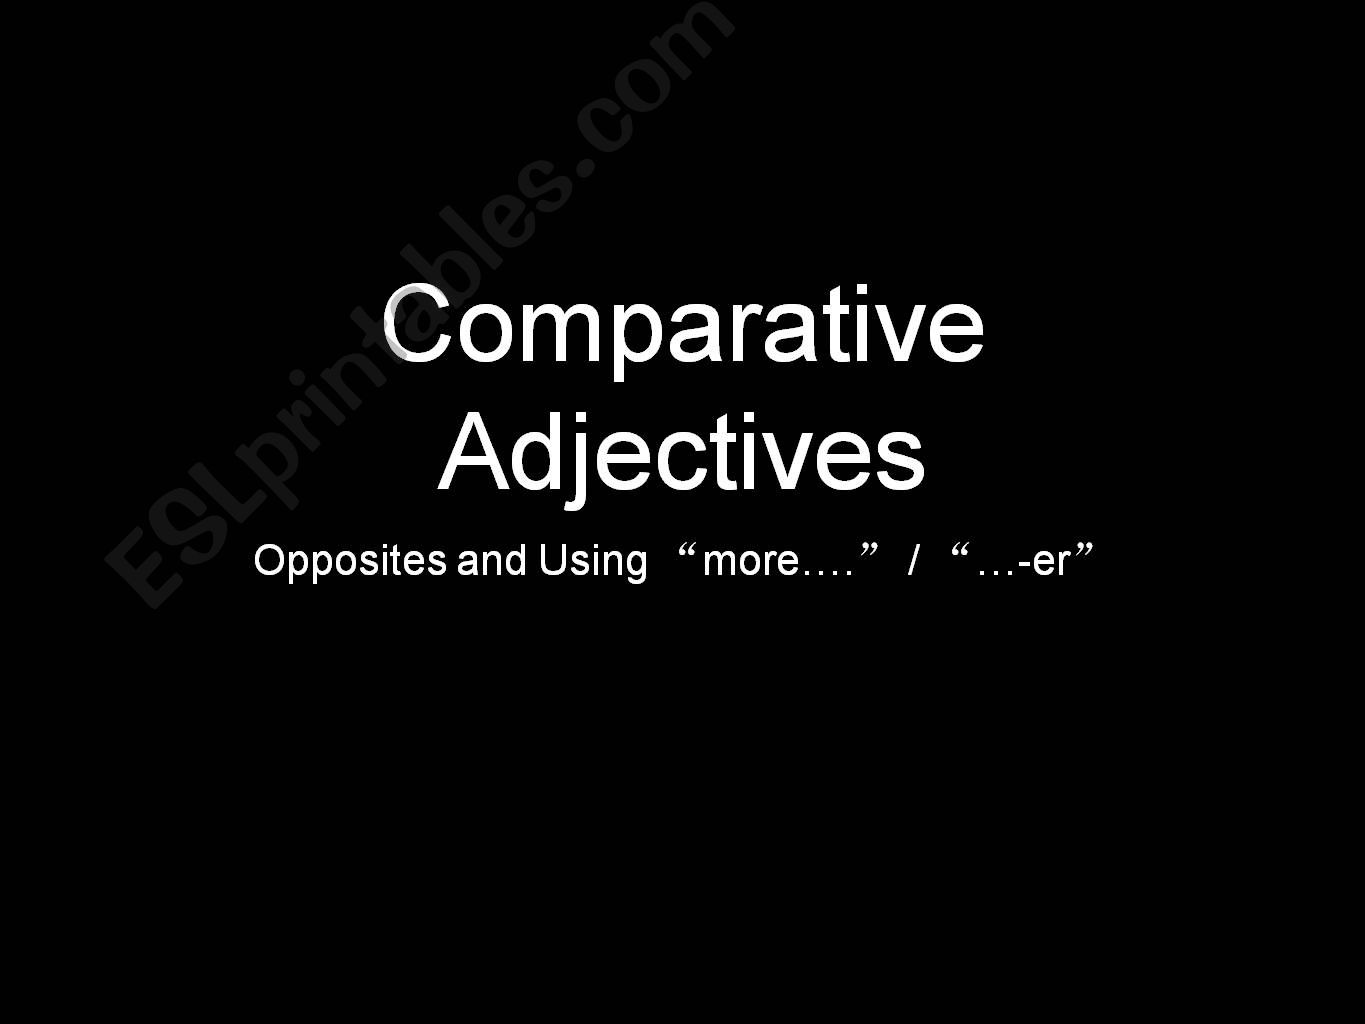 Comparative Adjectives and Opposites